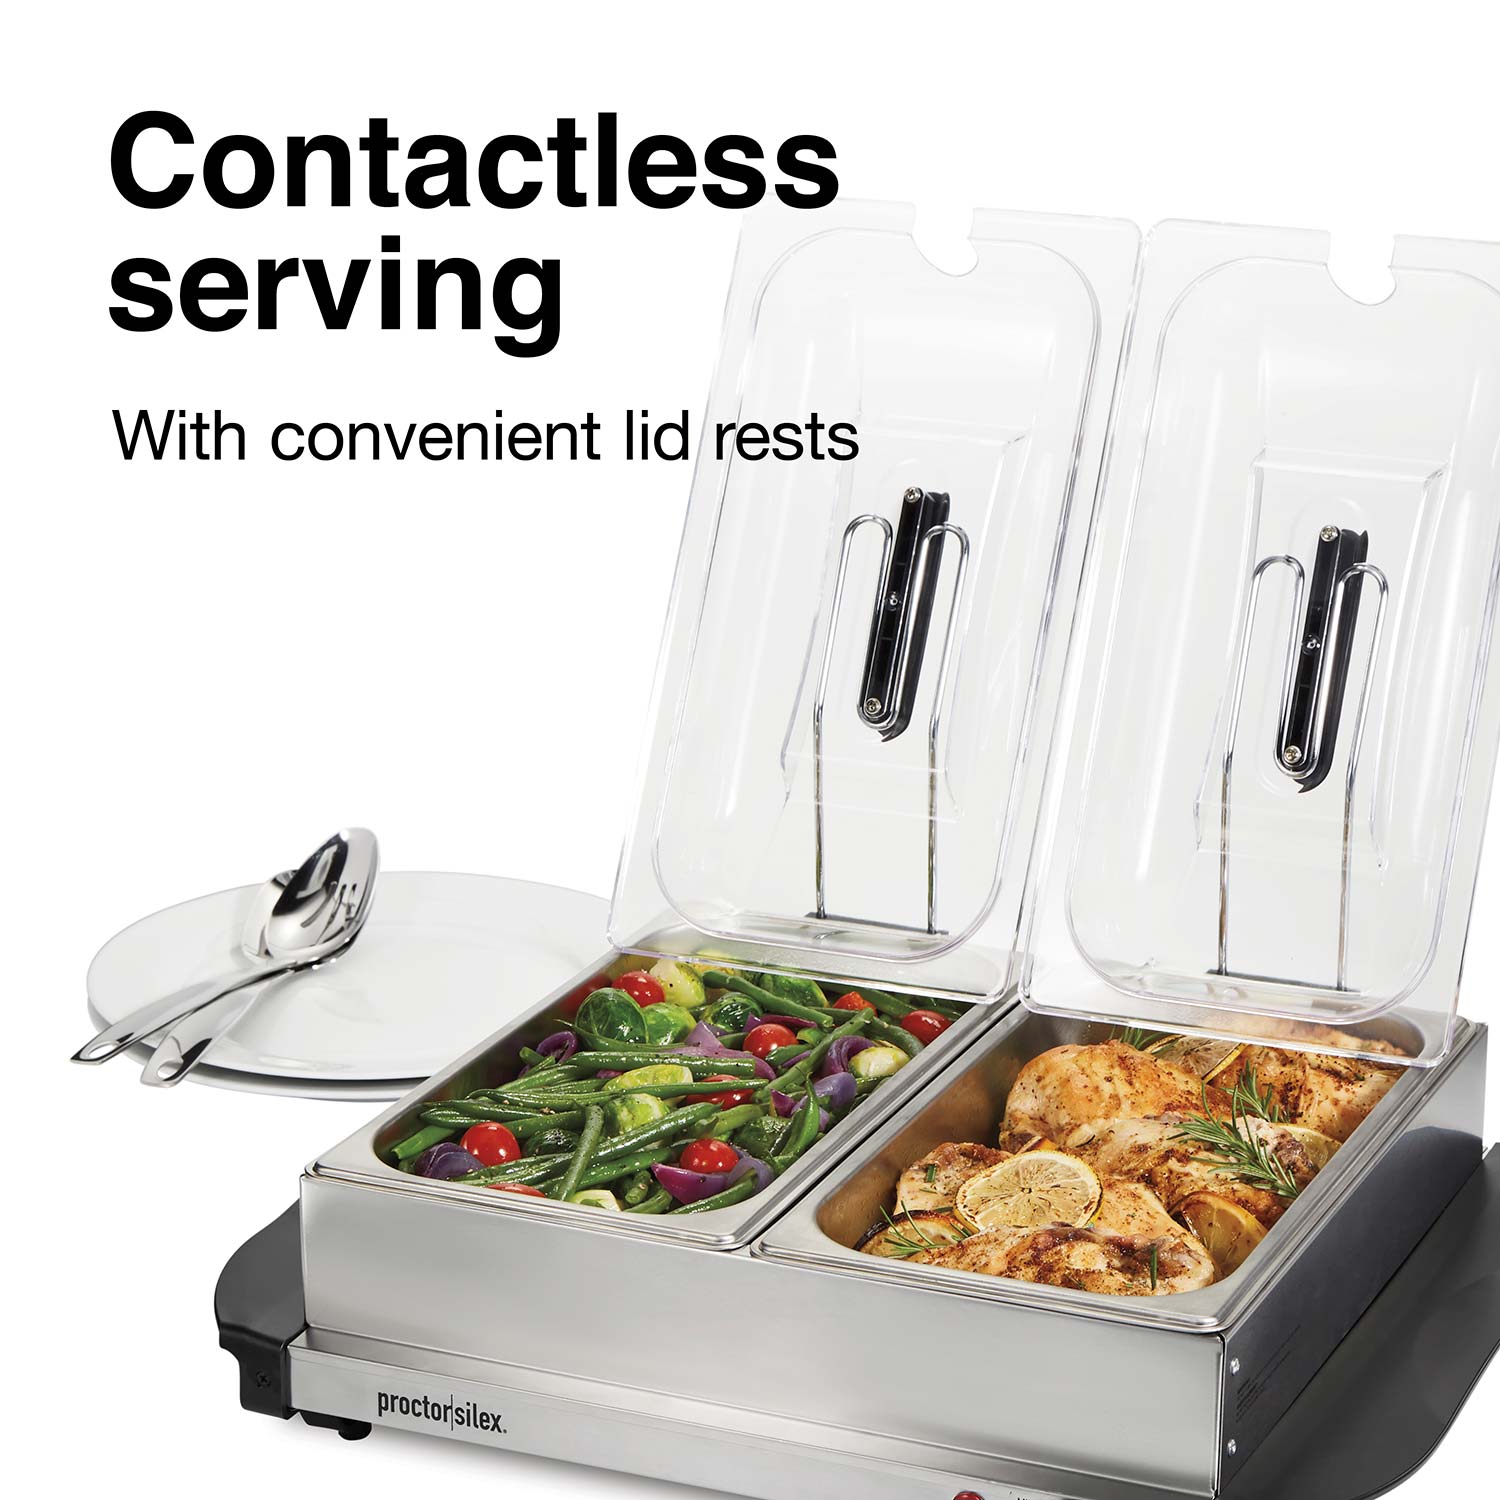 New in box Elite Gourmet Buffet Server - household items - by